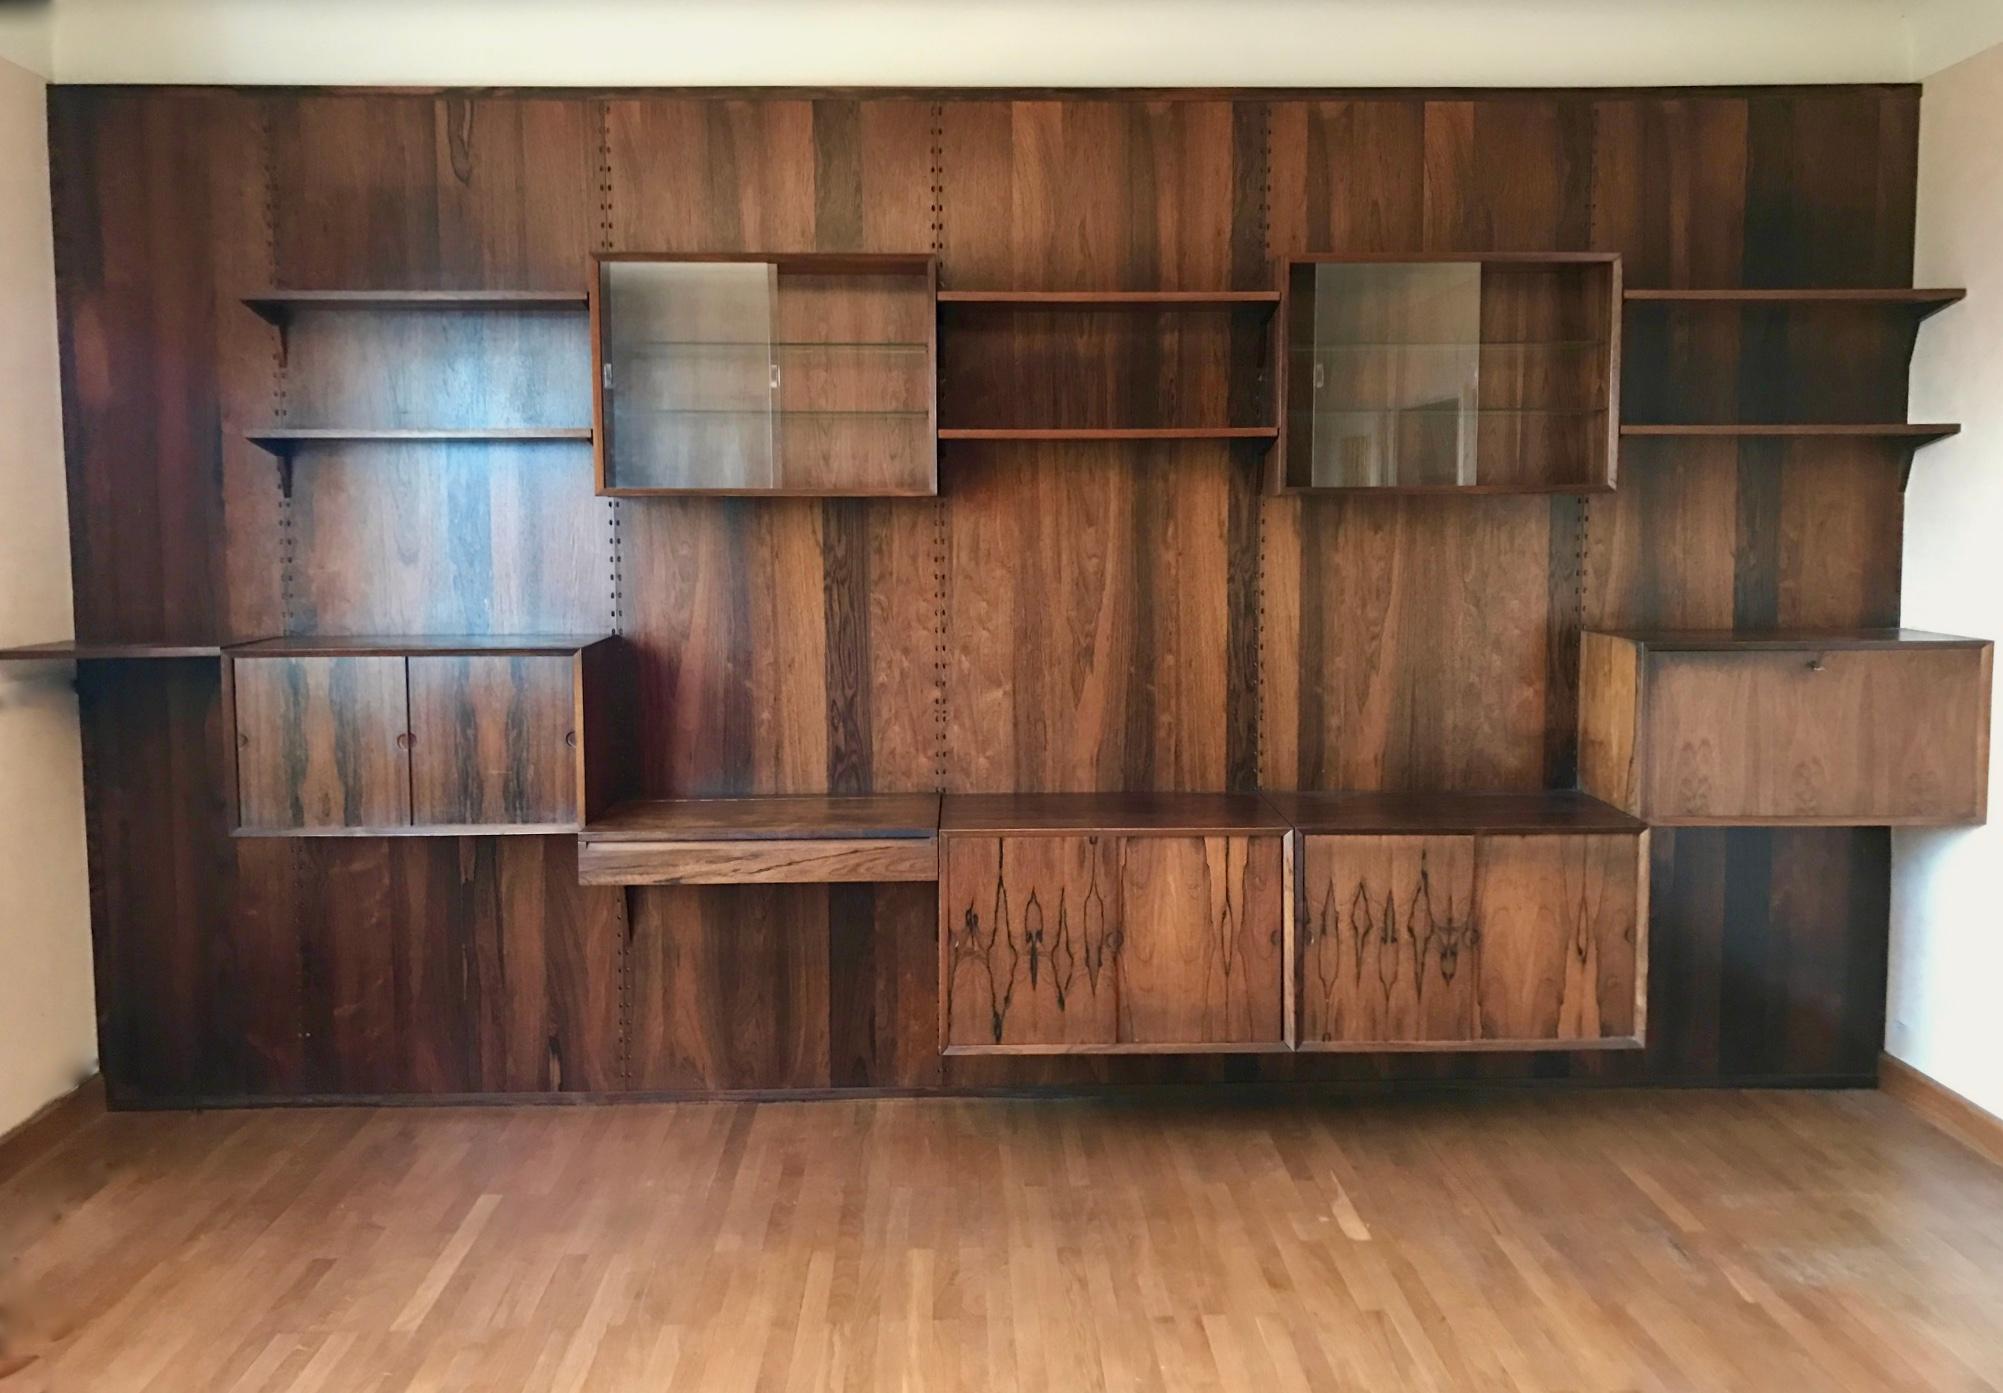 Poul Cadovius
circa 1958
Rosewood large unit, shelving system by Cado Denmark
very good condition
The wood veneer has a uniform color, there is no lack of veneer, the furniture can be sharpened according to the wall

Glass showcase and sliding